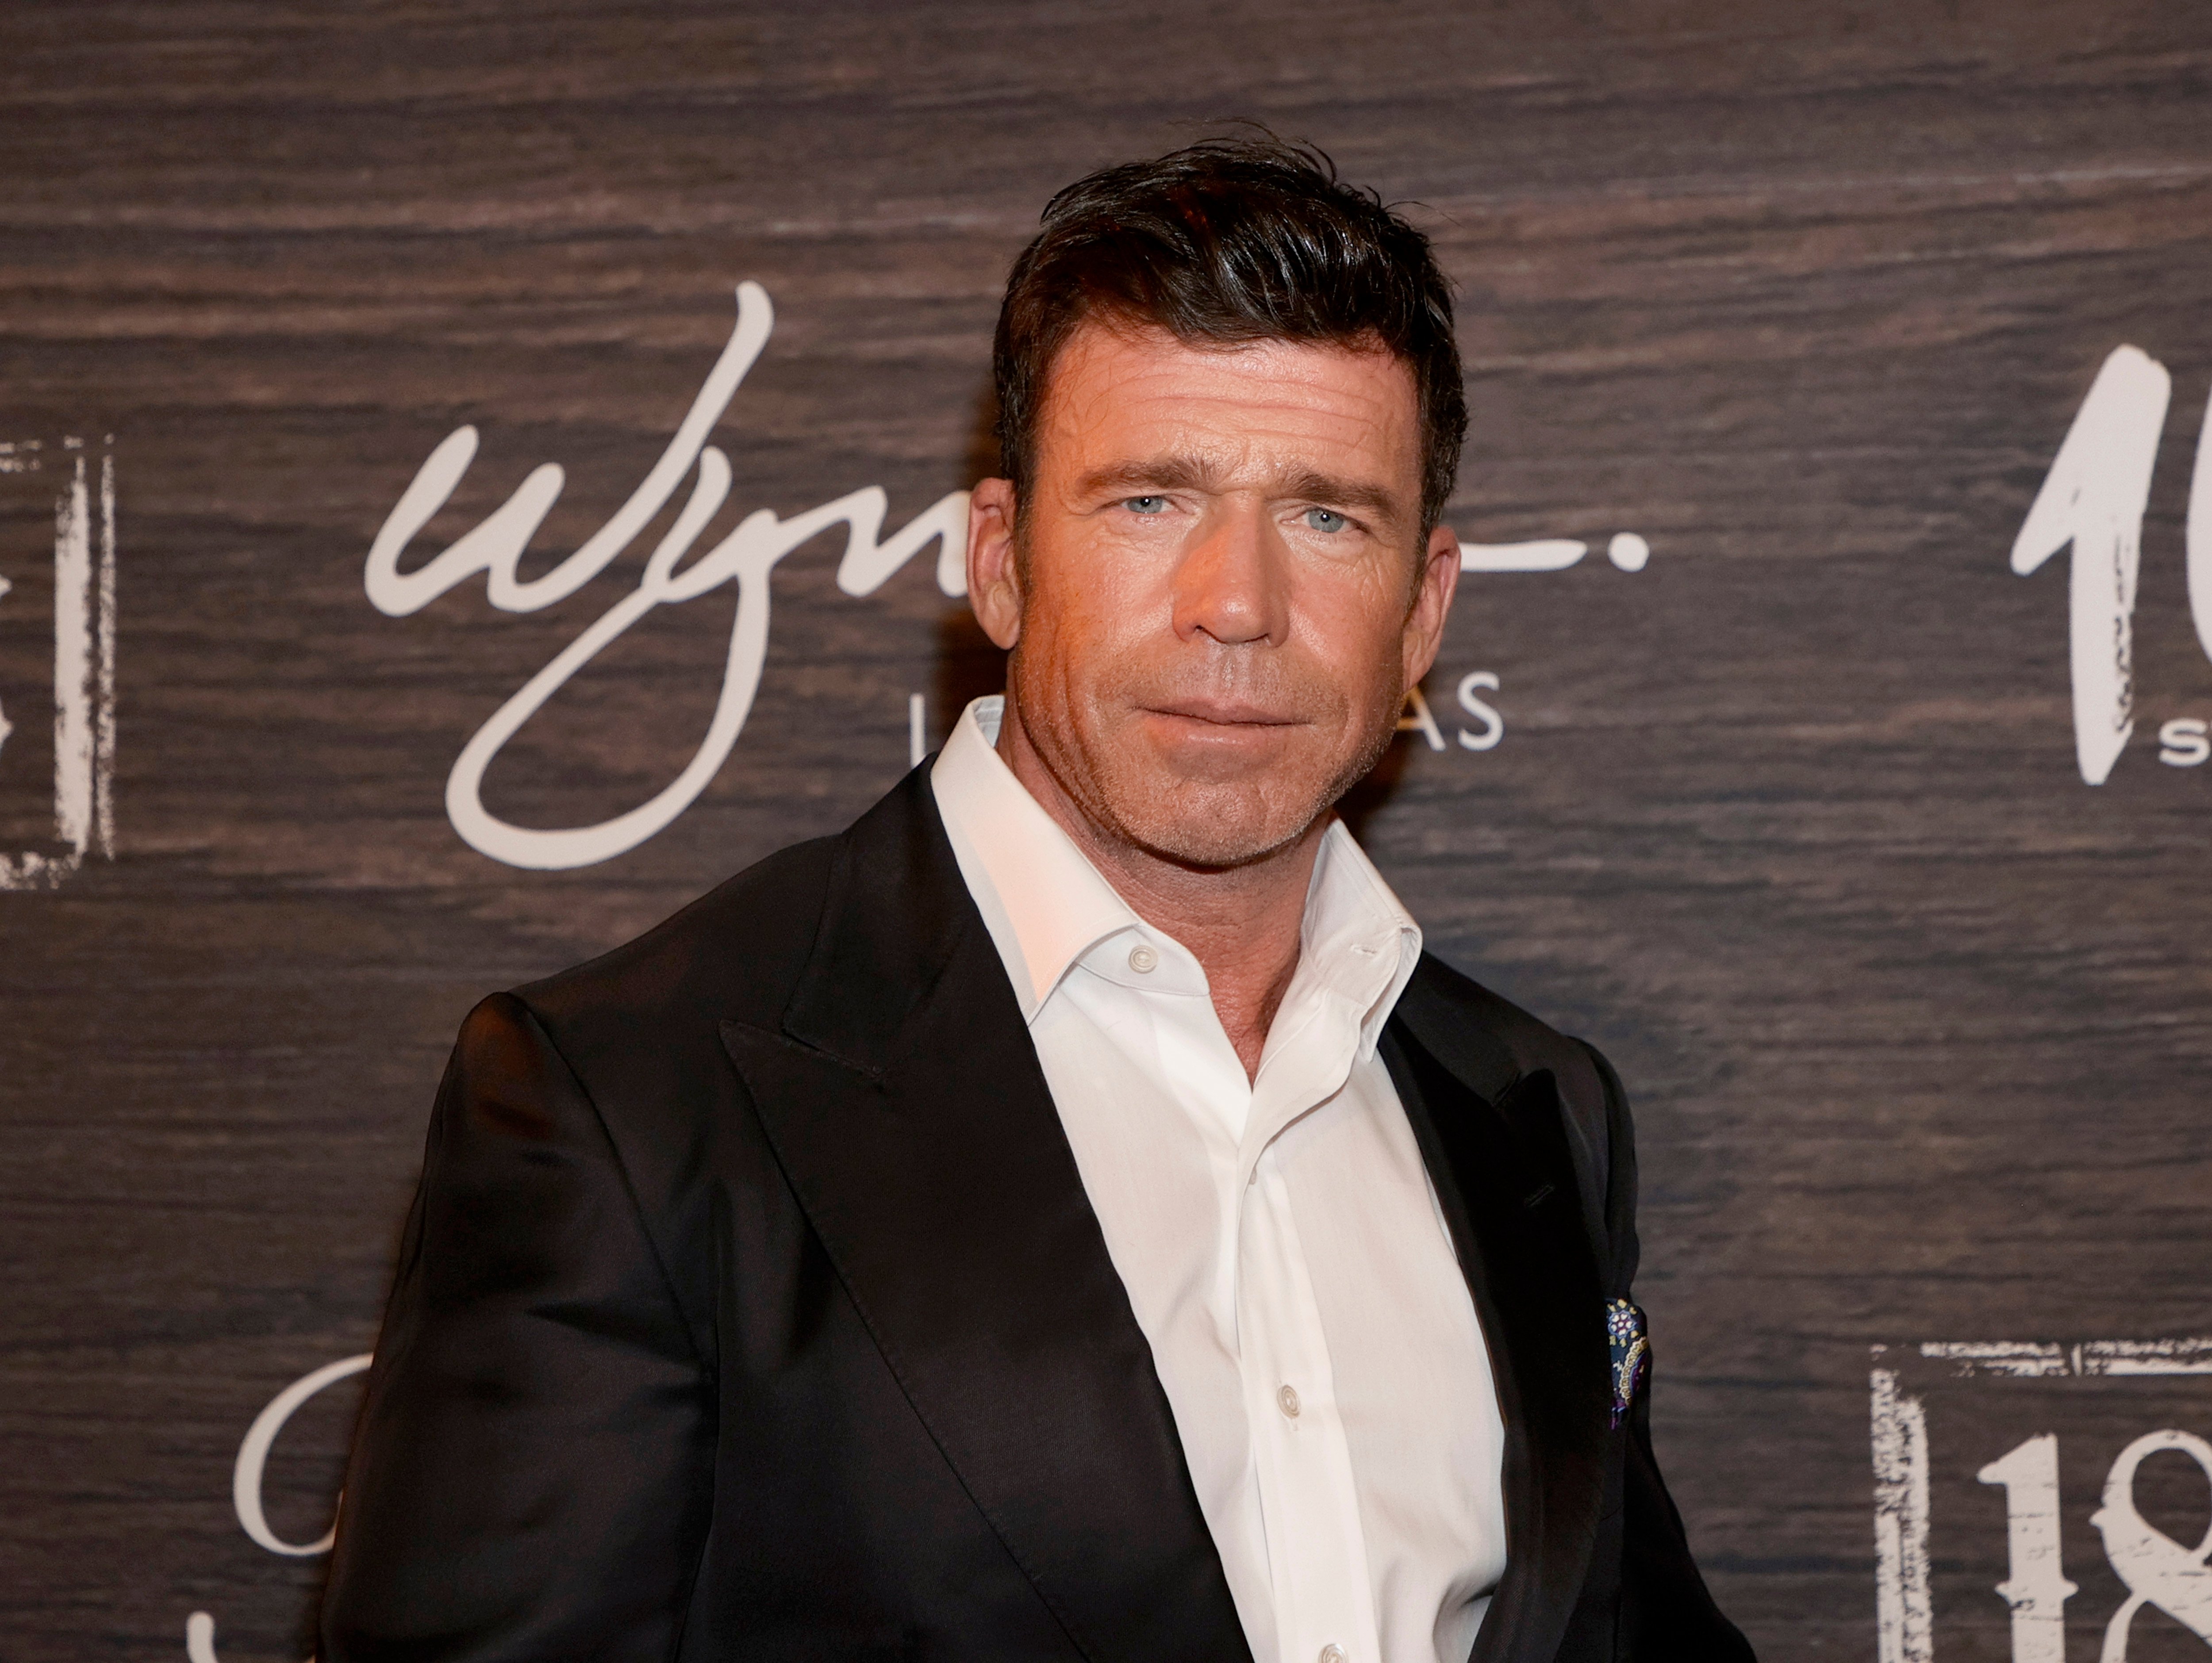 Taylor Sheridan attends the world premiere of '1883' at Encore Beach Club at Wynn Las Vegas on December 11, 2021 in Las Vegas, Nevada. Sheridan wears a white collared shirt and black suit jacket.